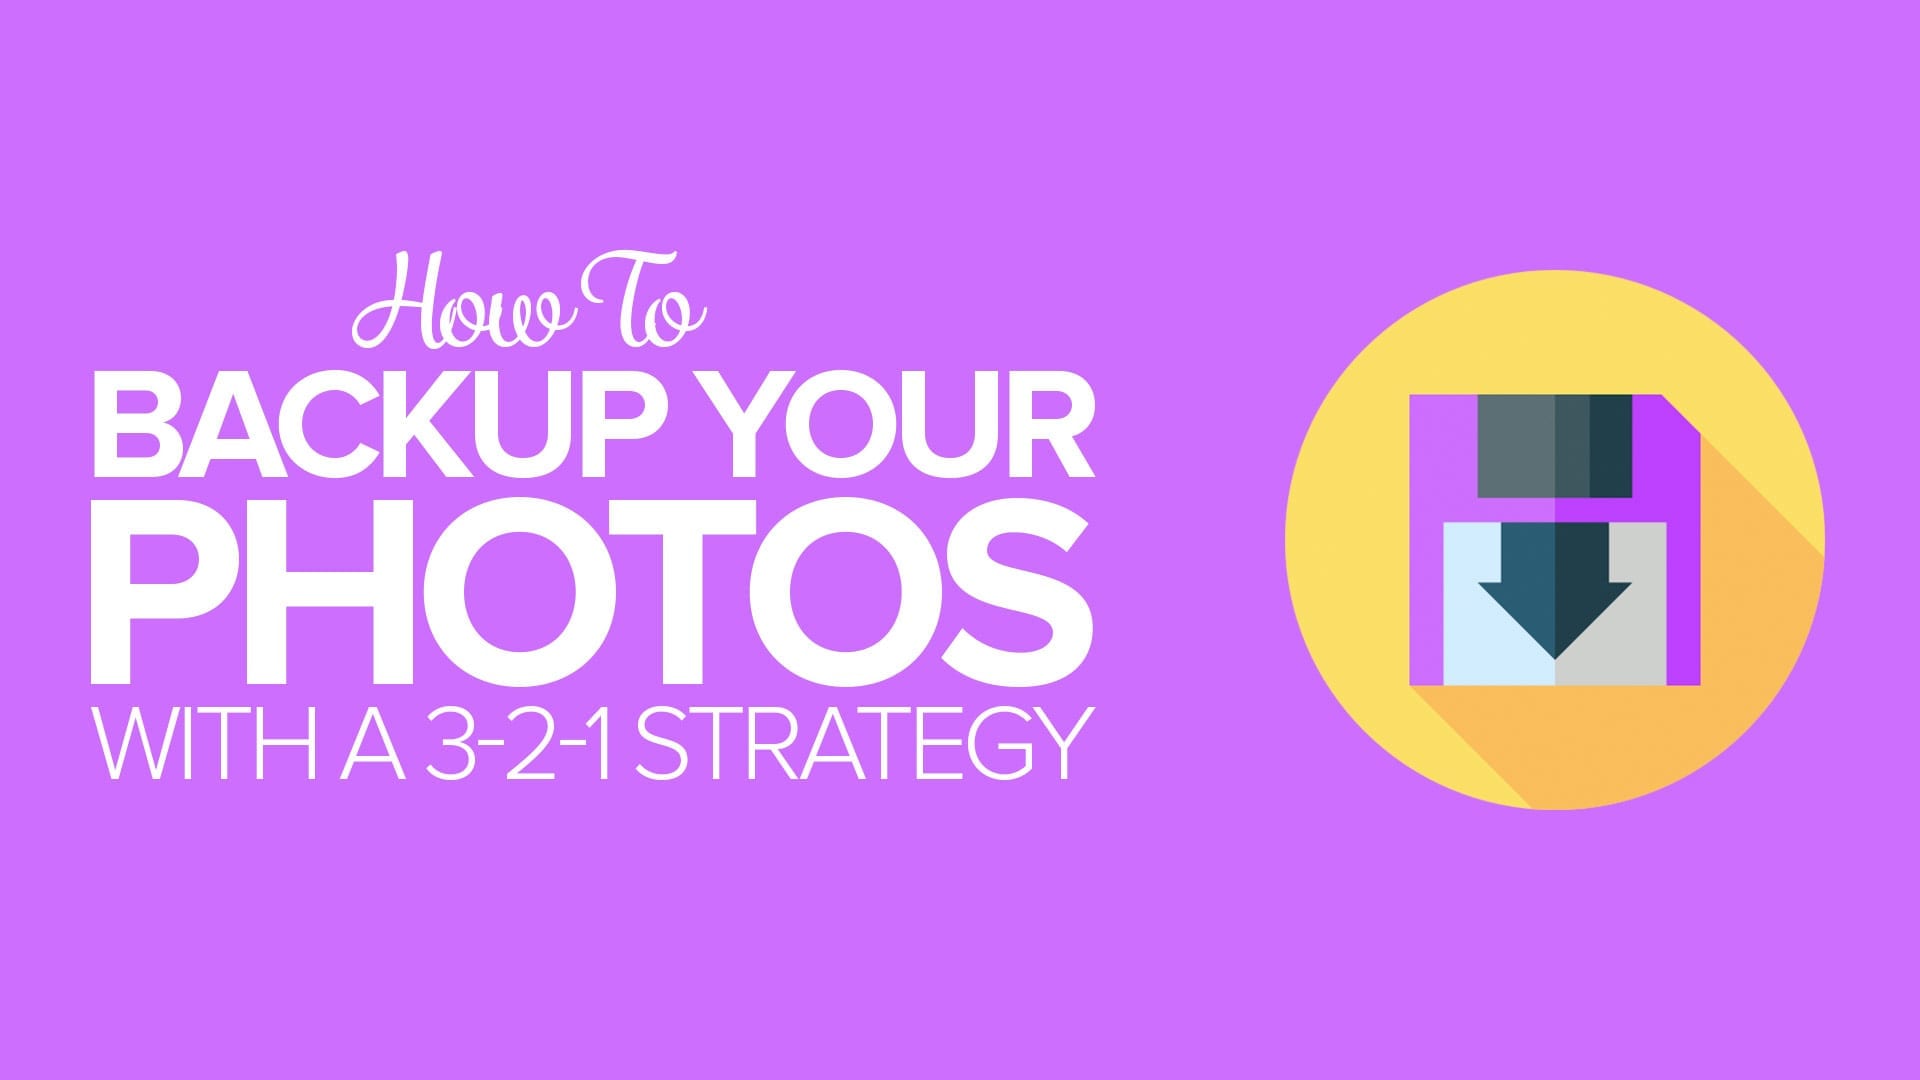 How to Backup Your Photos with a 3-2-1 Strategy